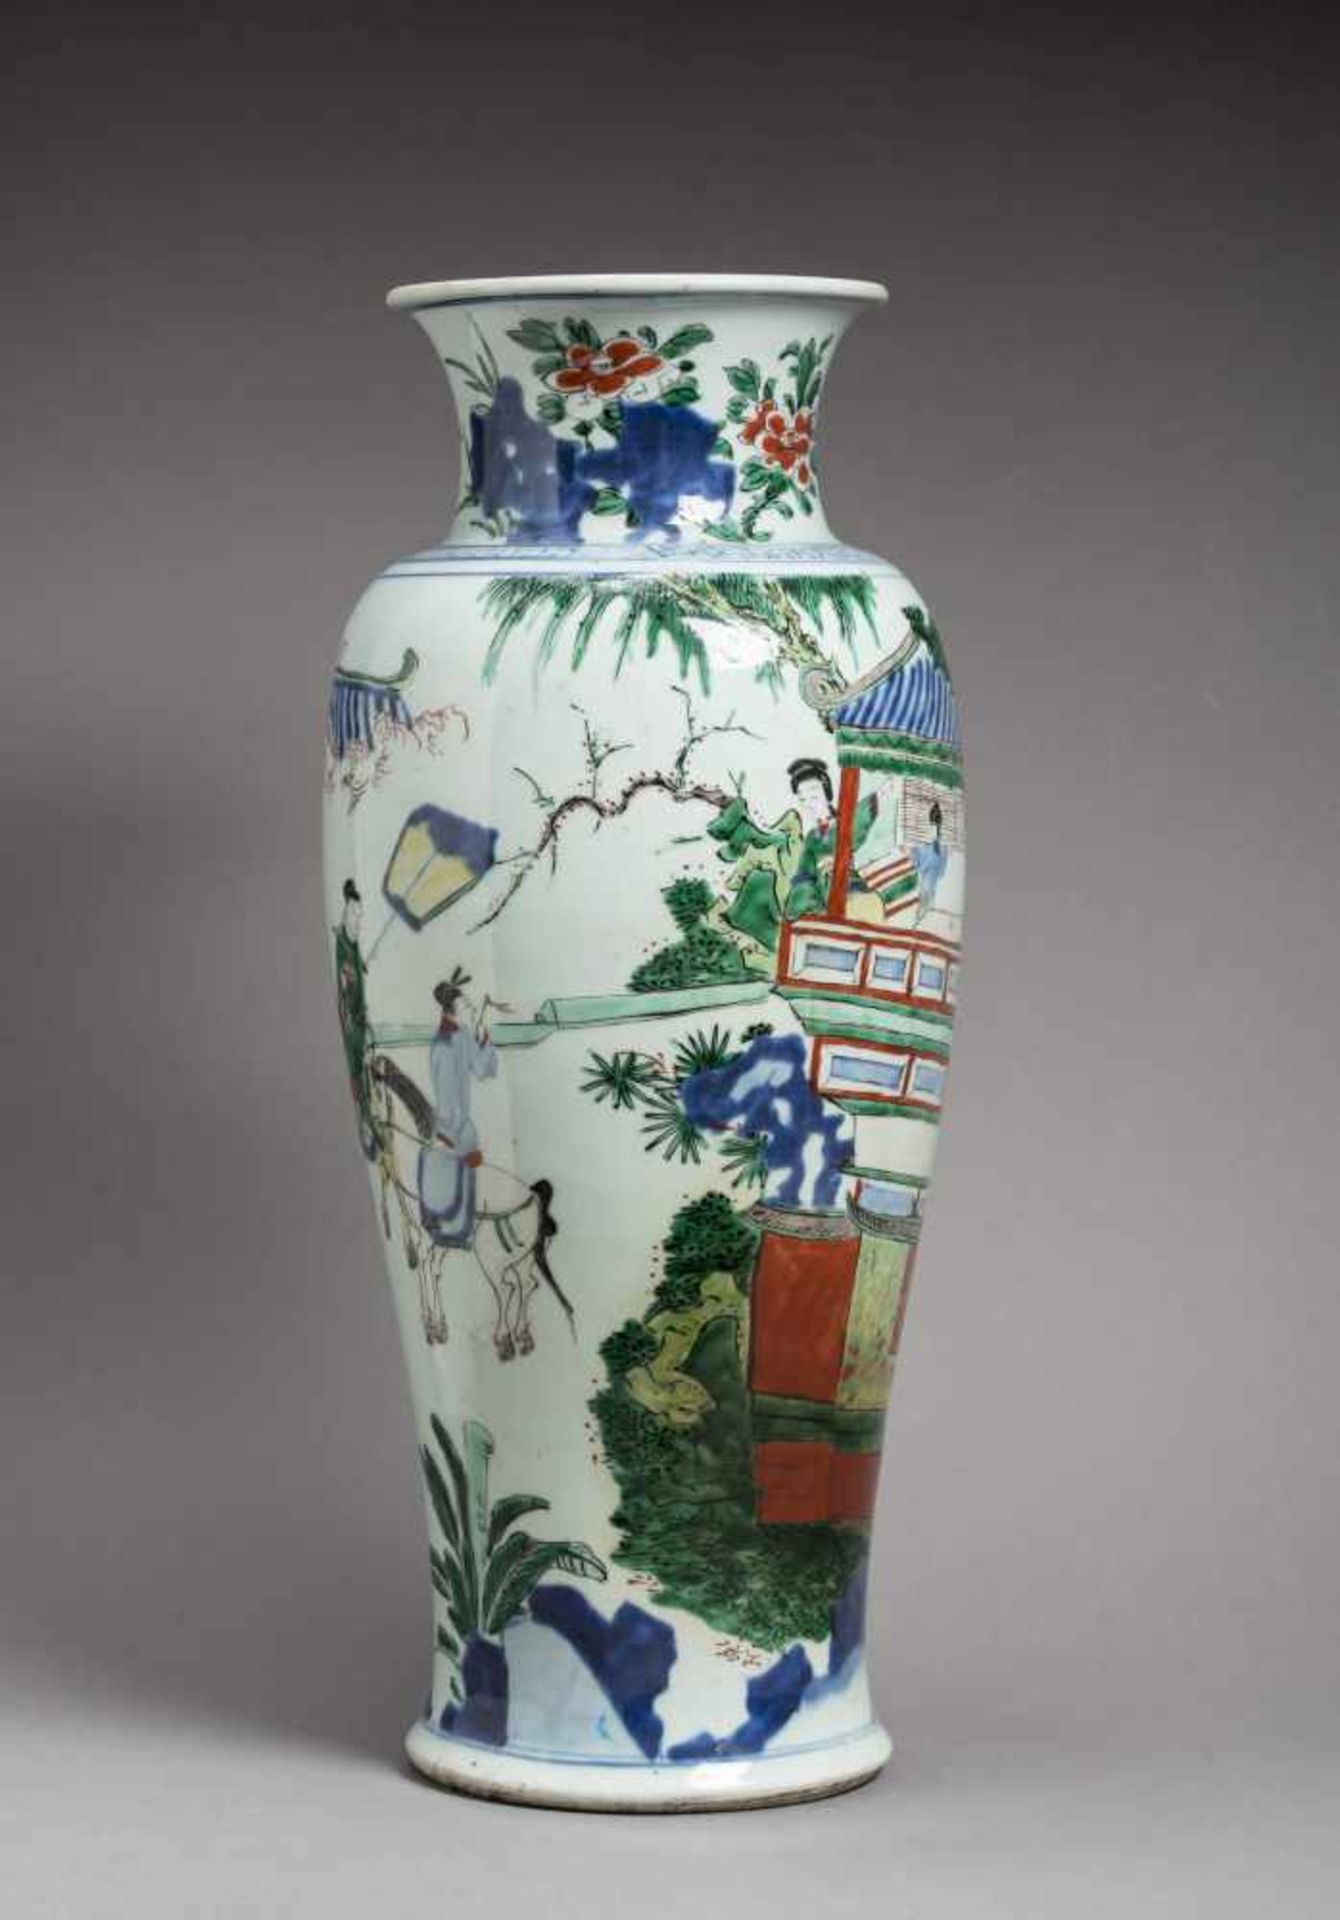 A LARGE TRANSITIONAL WUCAI BALUSTER VASE WITH PALACE SCENE, 17th CENTURY White glazed porcelain with